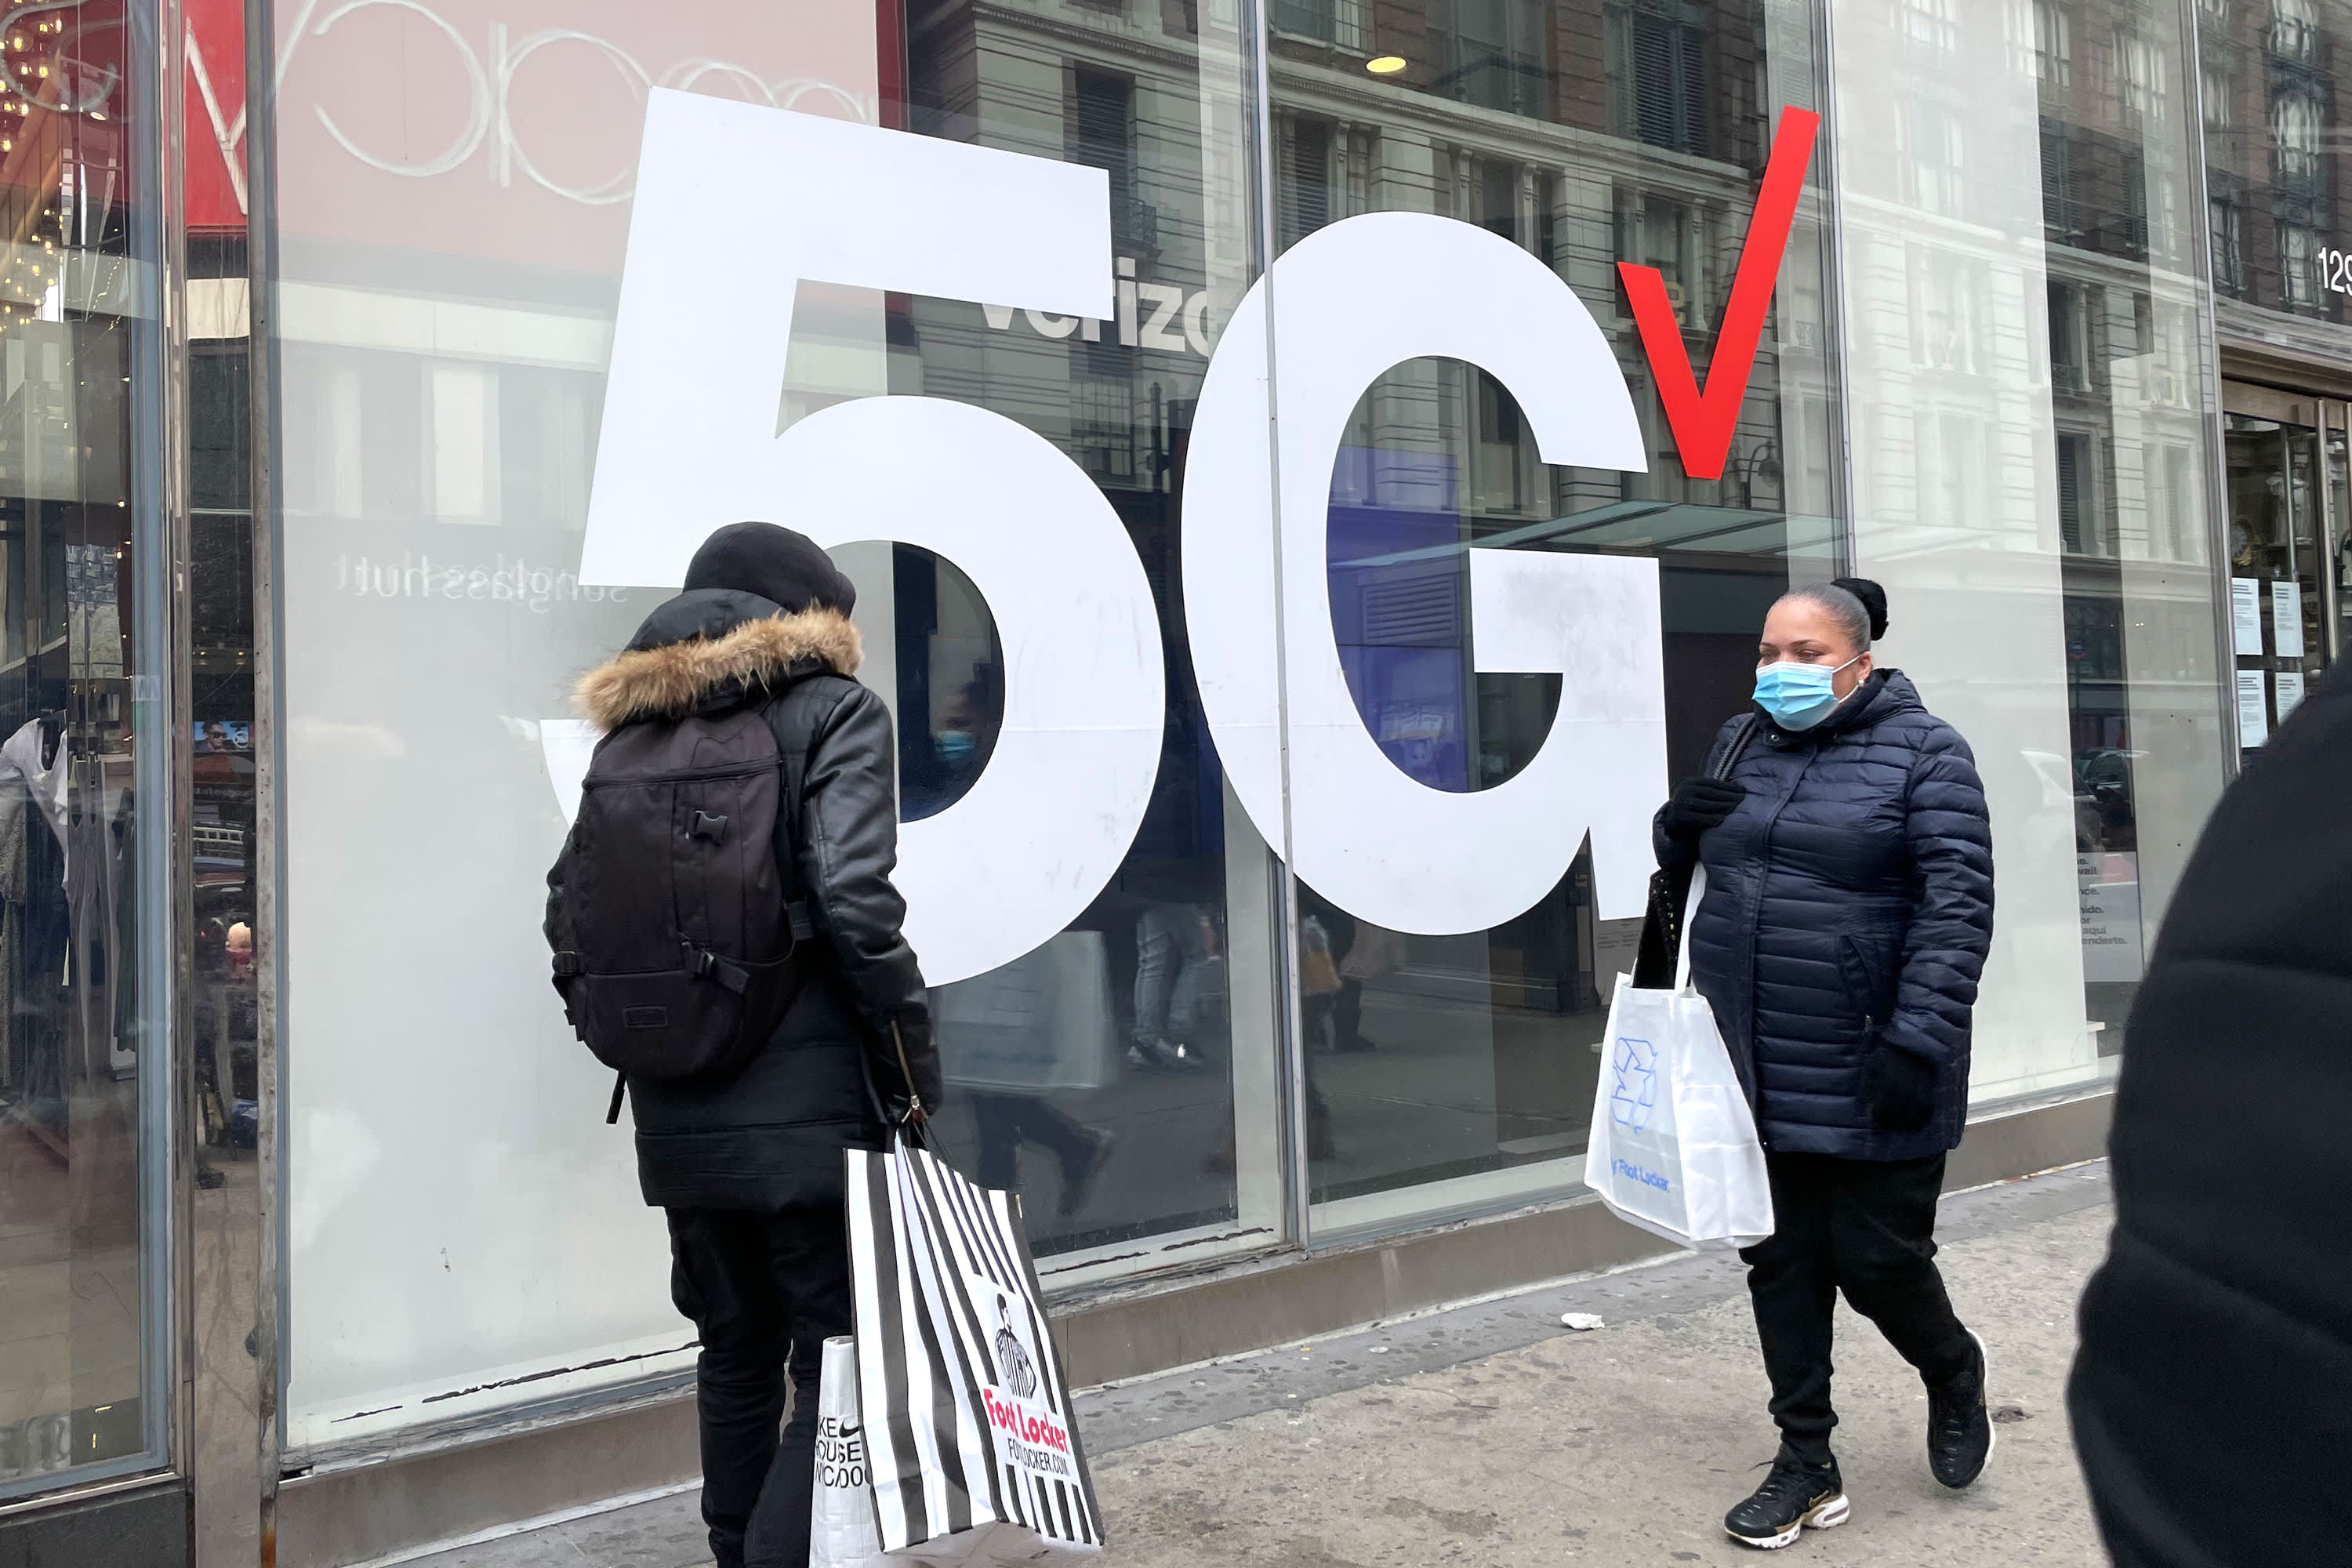 5G launch Wednesday caps years of hype, investment